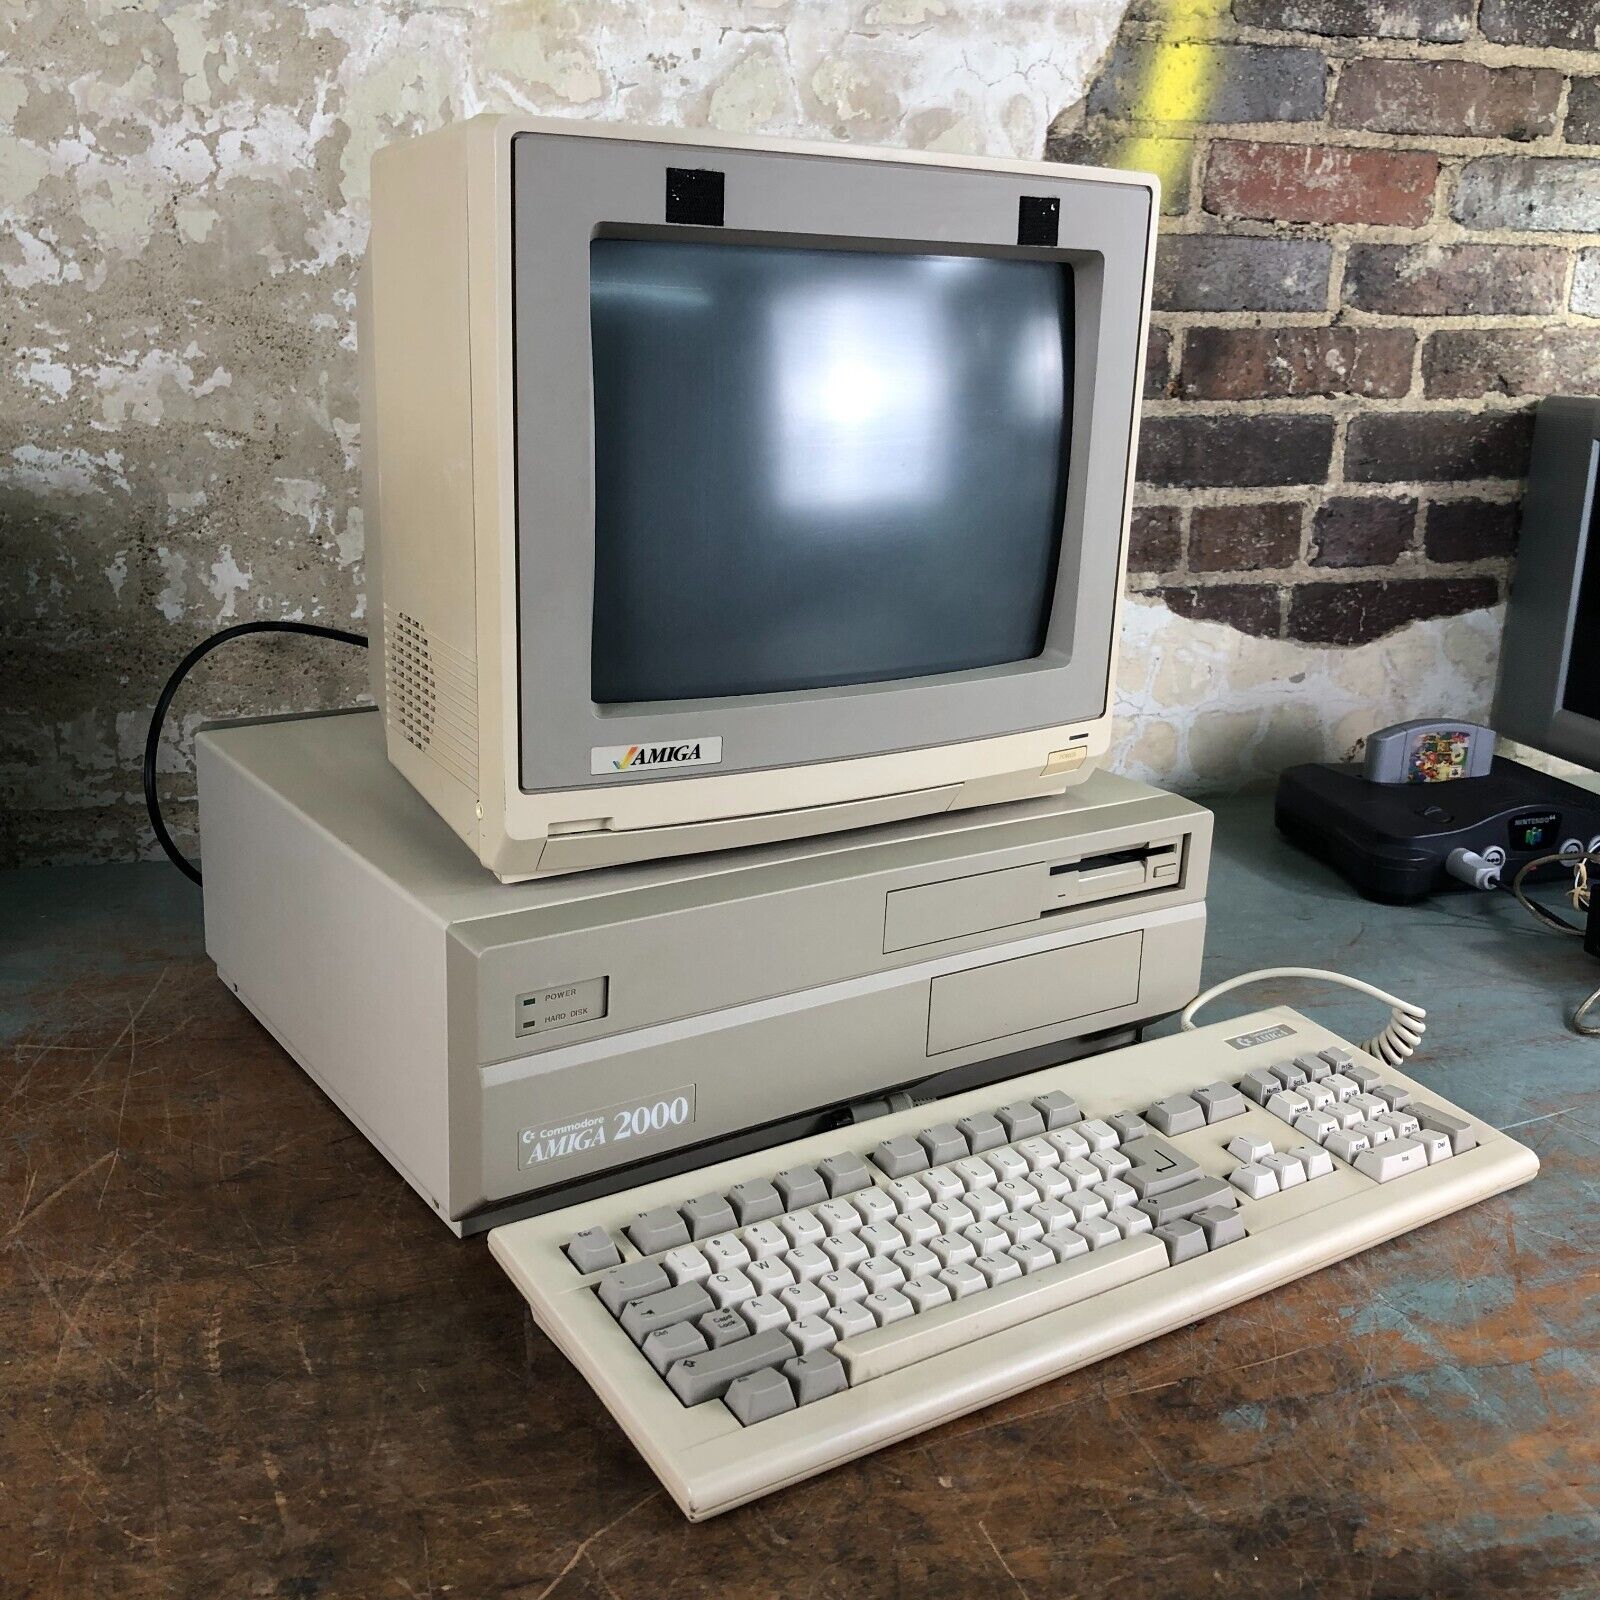 Vintage Commodore Amiga 2000 Computer w/1080 Monitor & Keyboard - WORKS GREAT